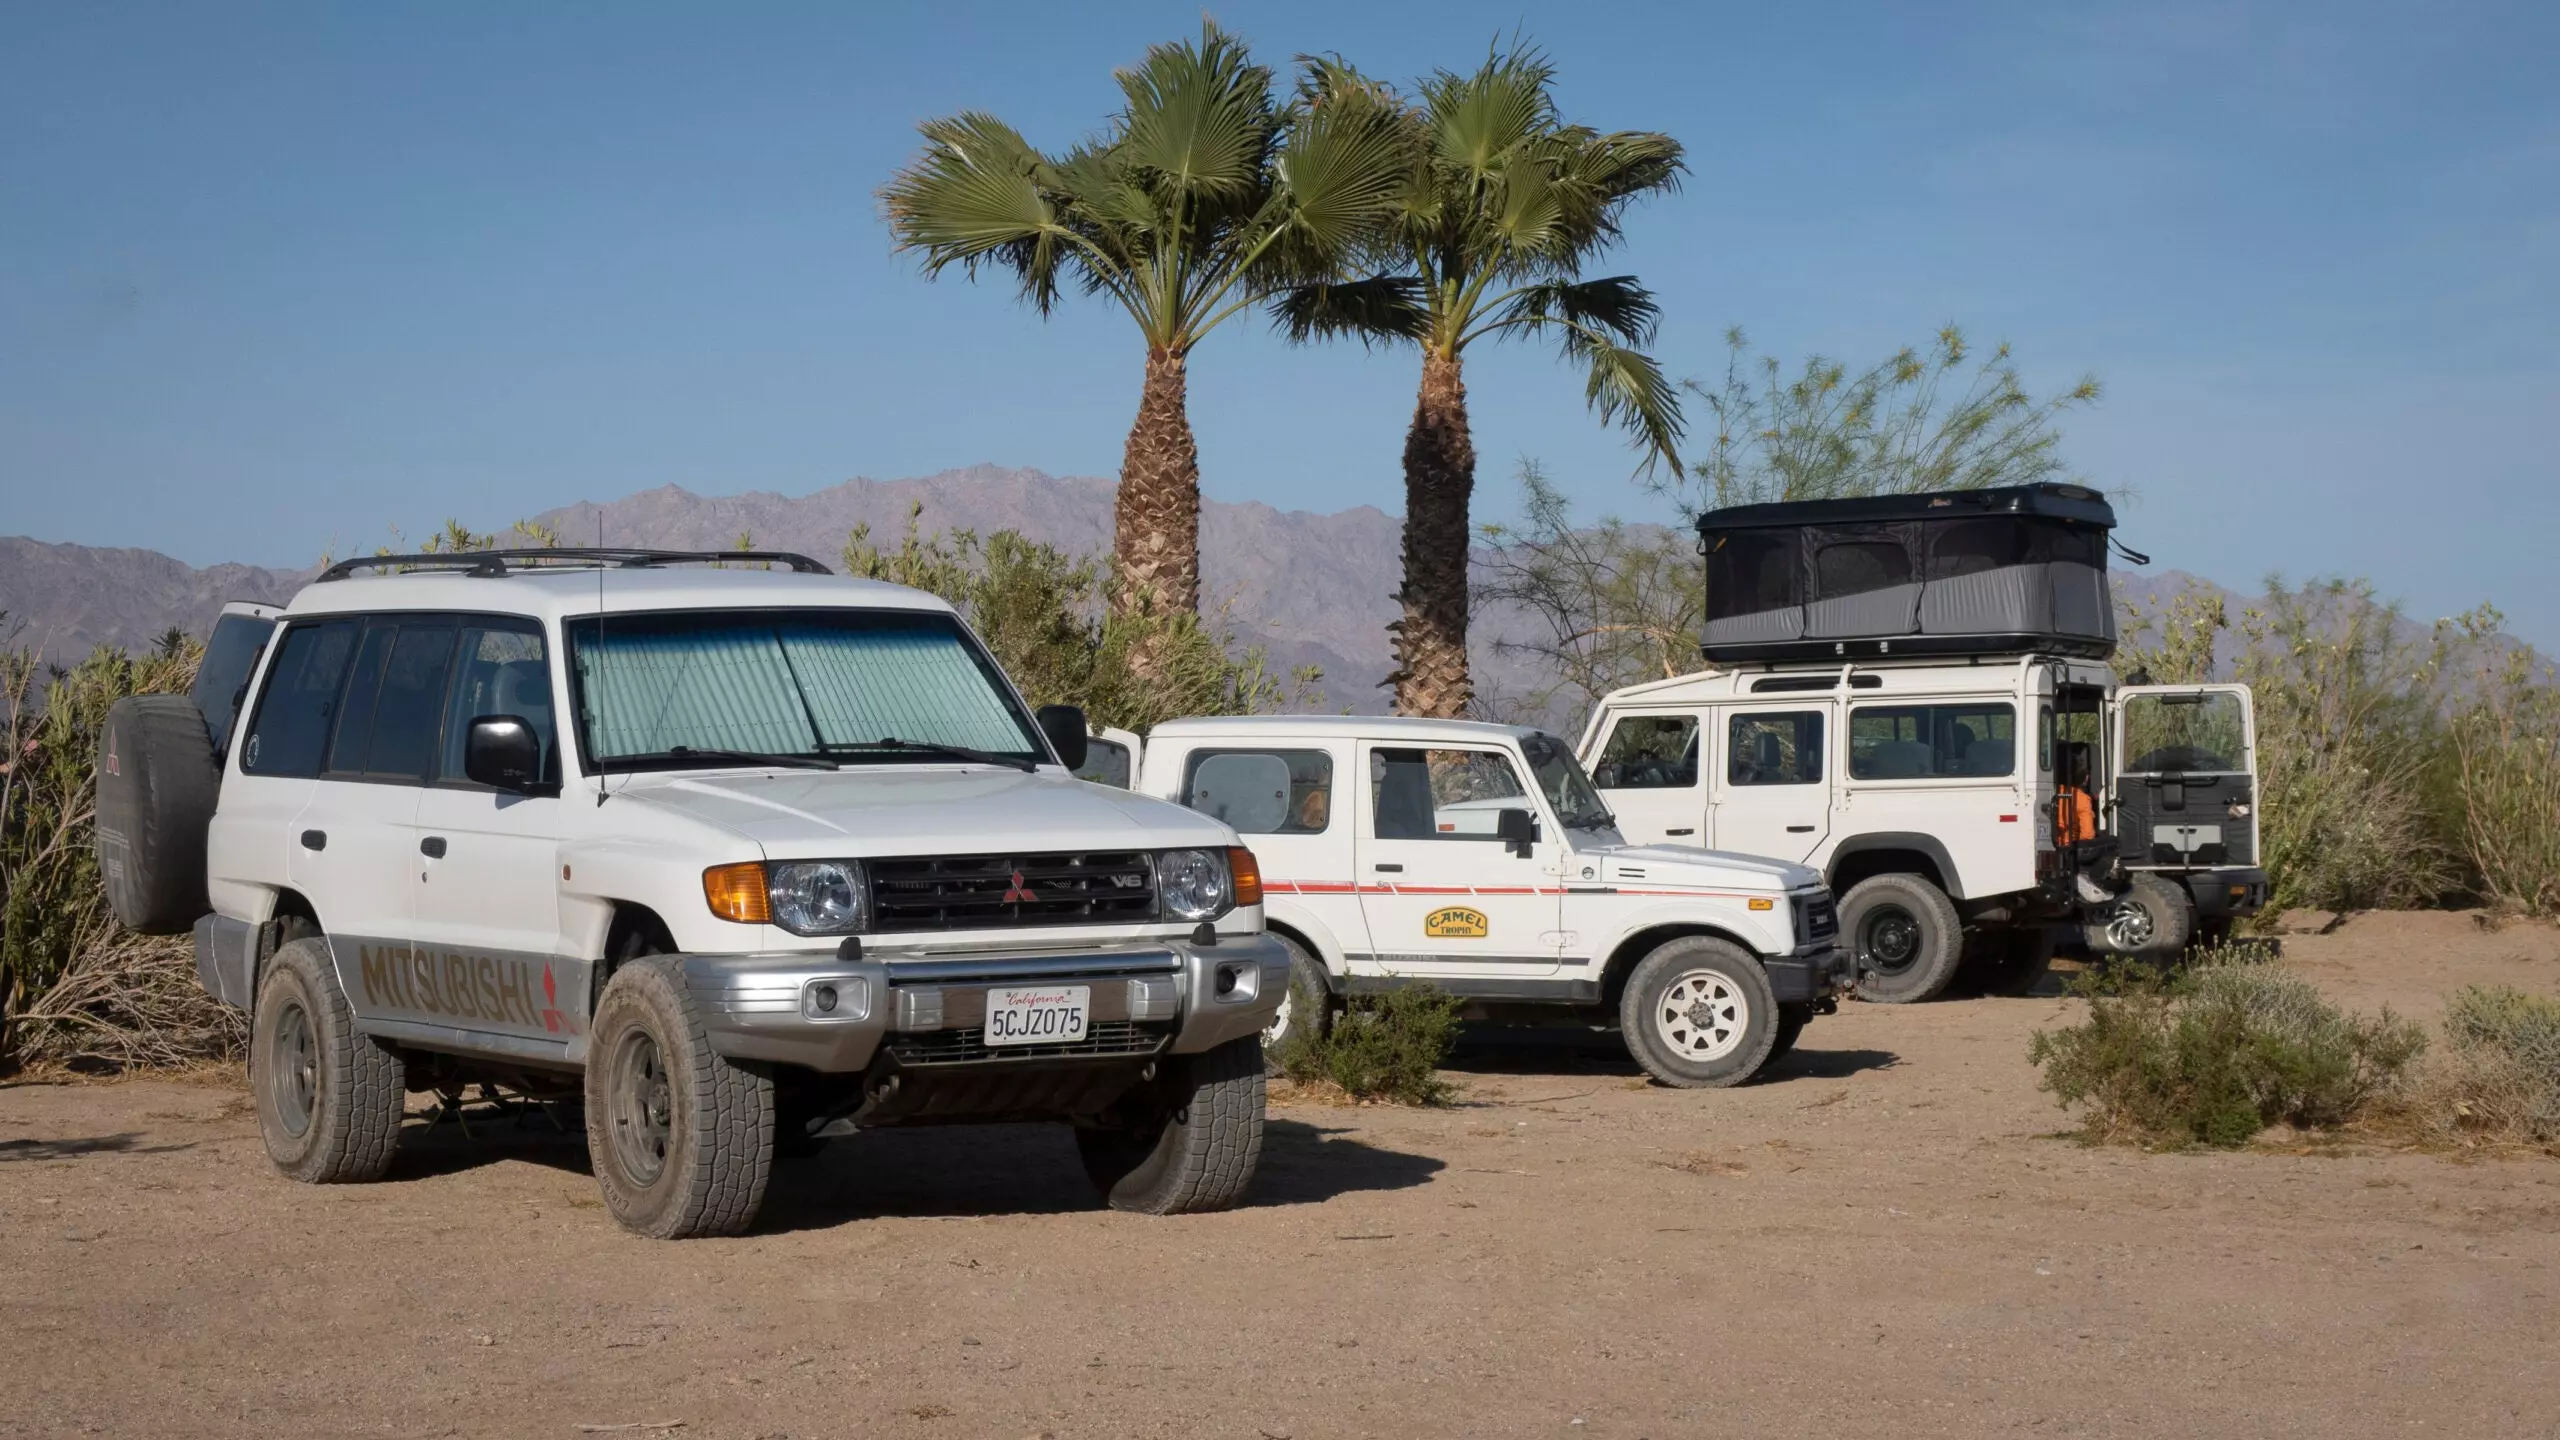 What’s Better: Roof Tent, Ground Tent, or Sleeping in Your Truck?